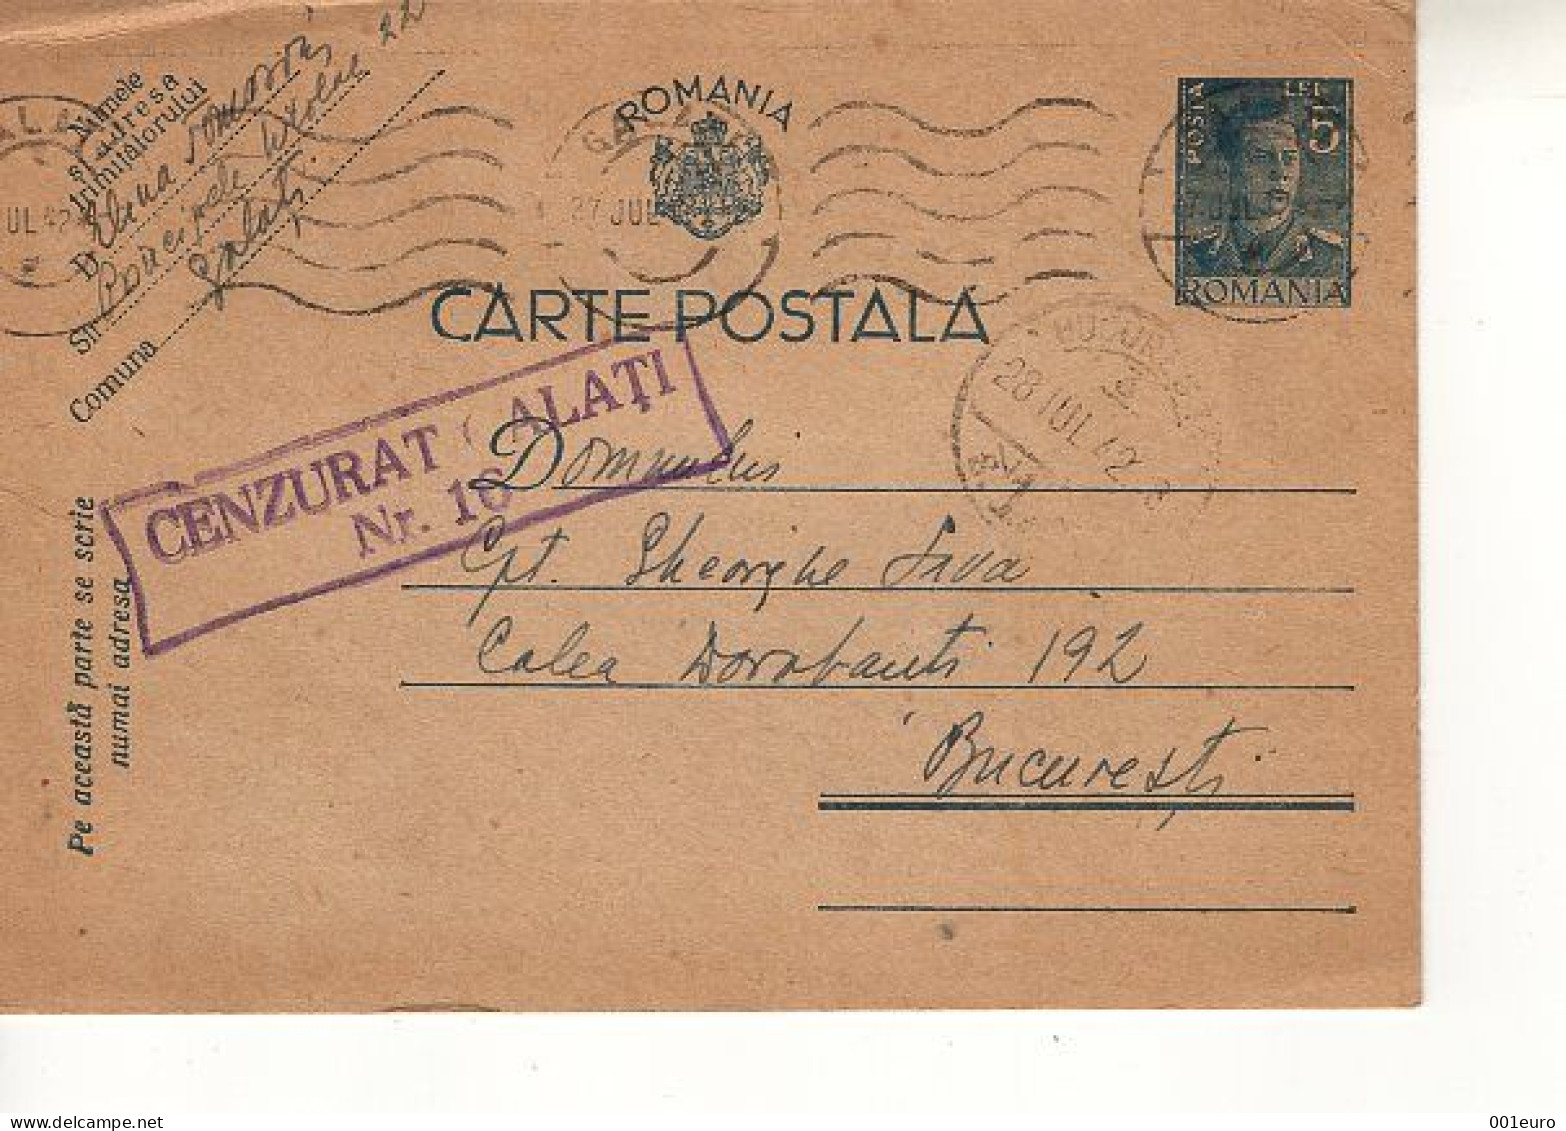 ROMANIA 1942: CENSORED MAIL, Used Prepaid Postal Stationery Card - Registered Shipping! - Ganzsachen